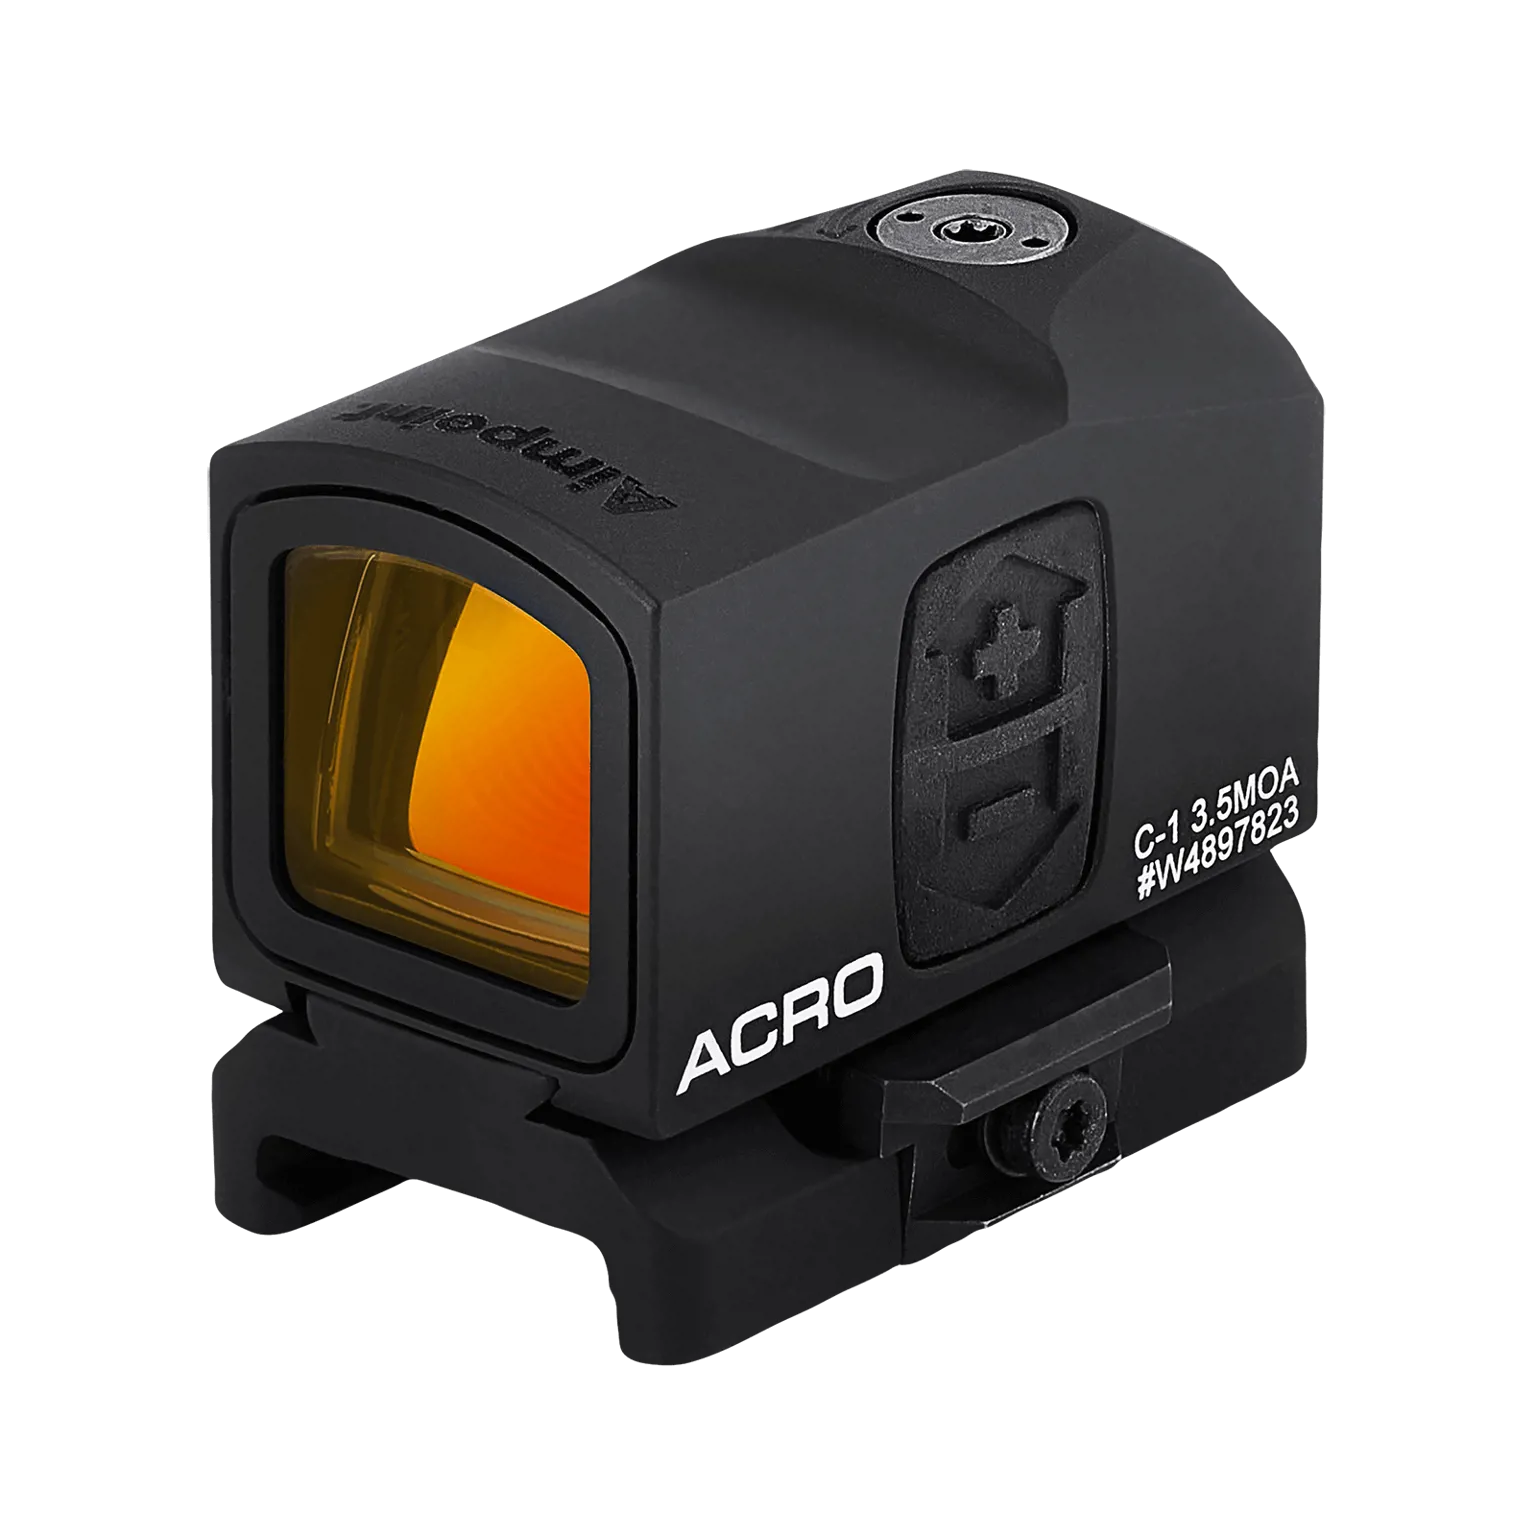 Acro C-1™ 3.5 MOA - Red dot reflex sight with fixed mount 22 mm - 1